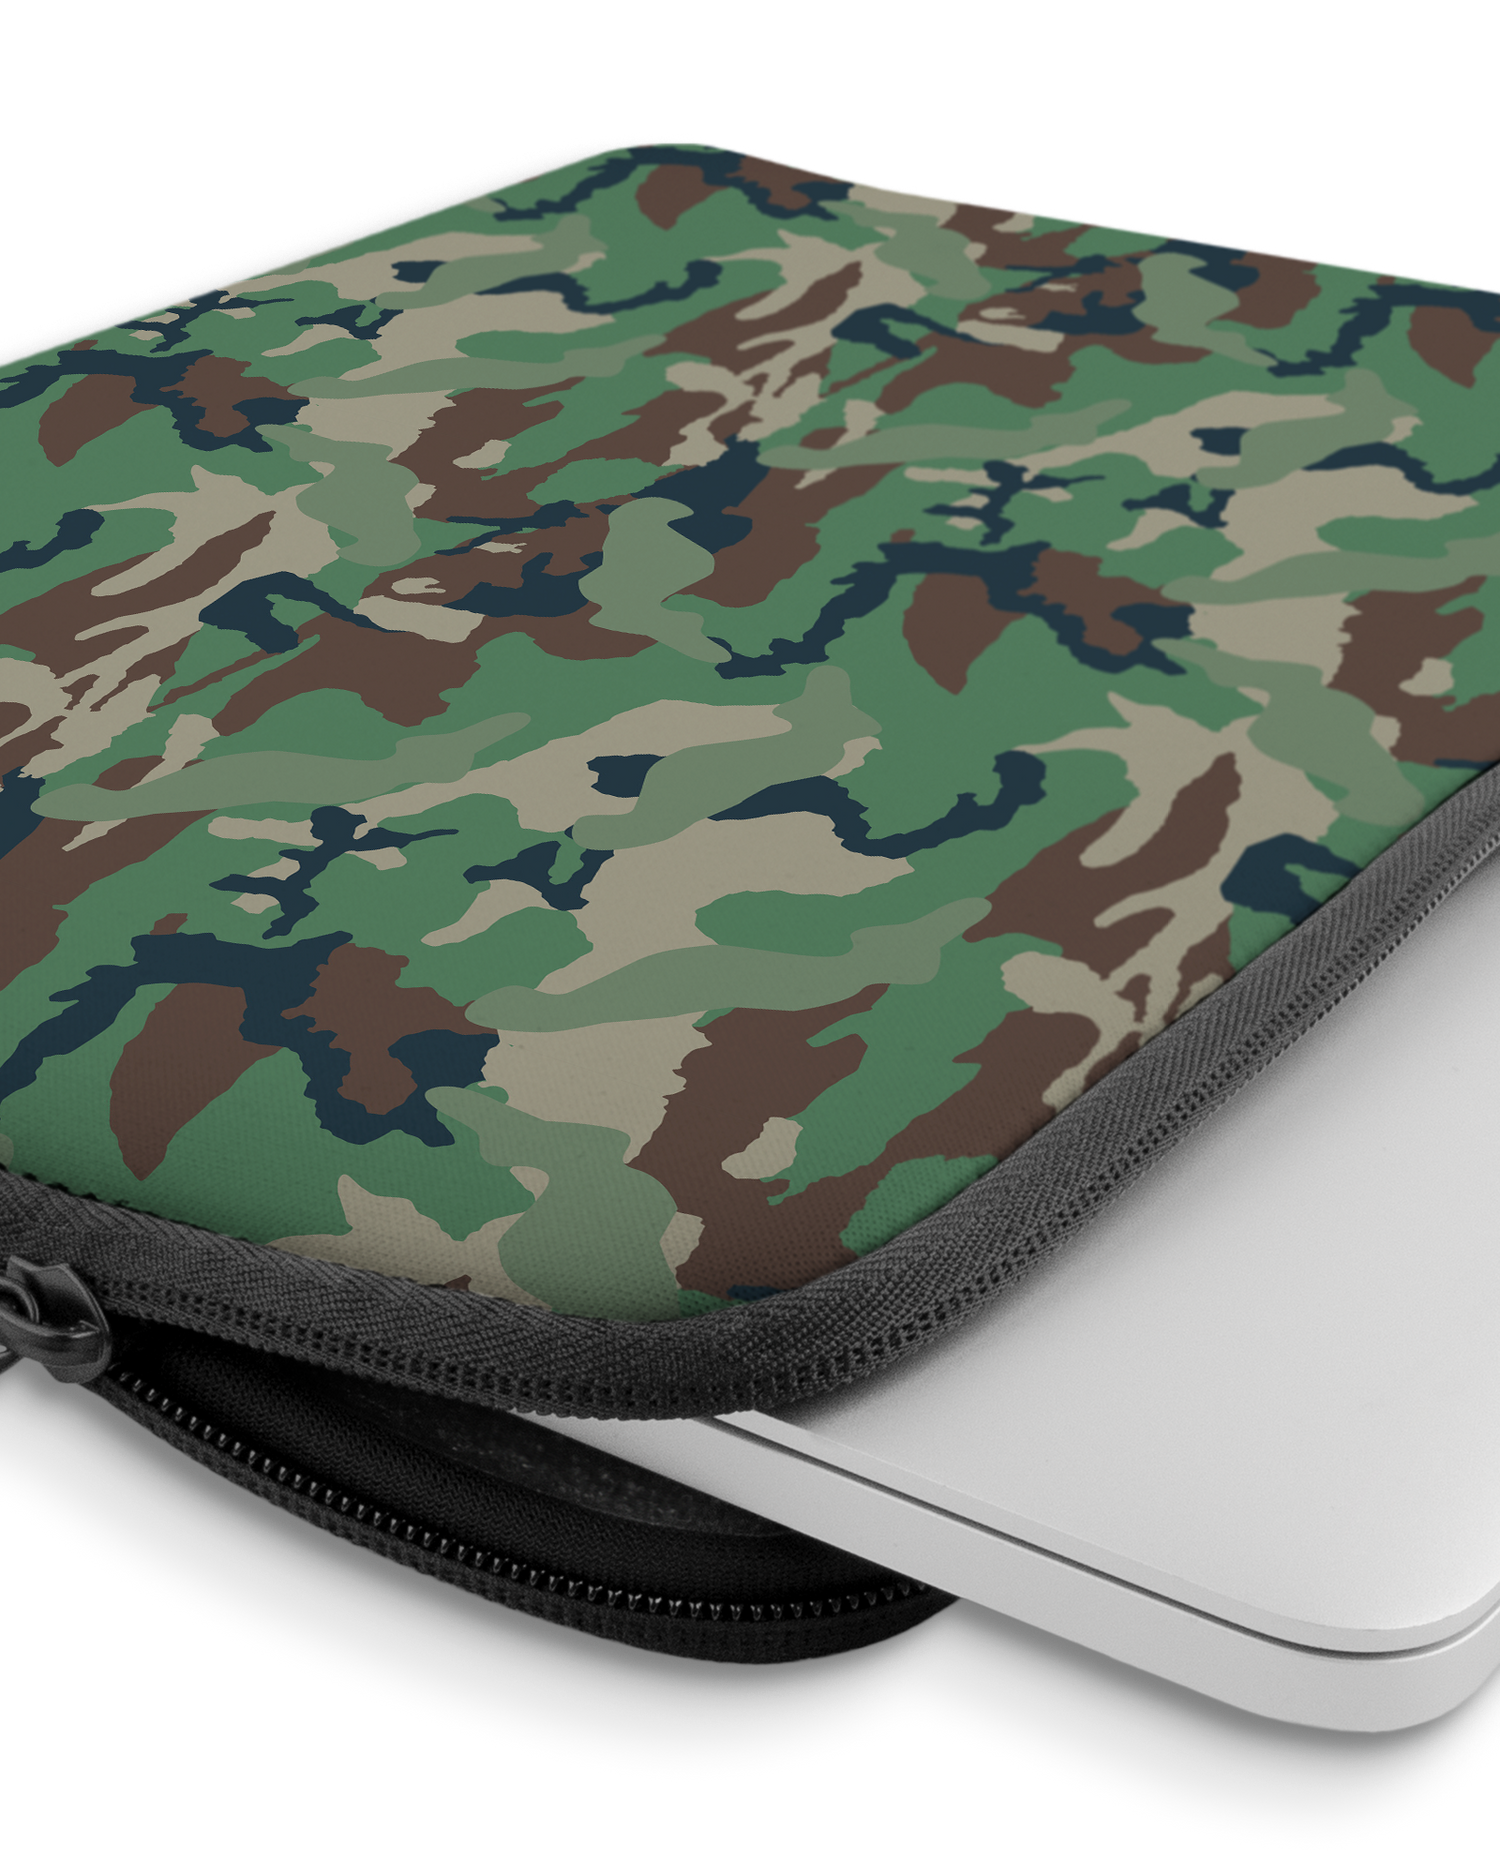 Green and Brown Camo Laptop Case 13-14 inch with device inside